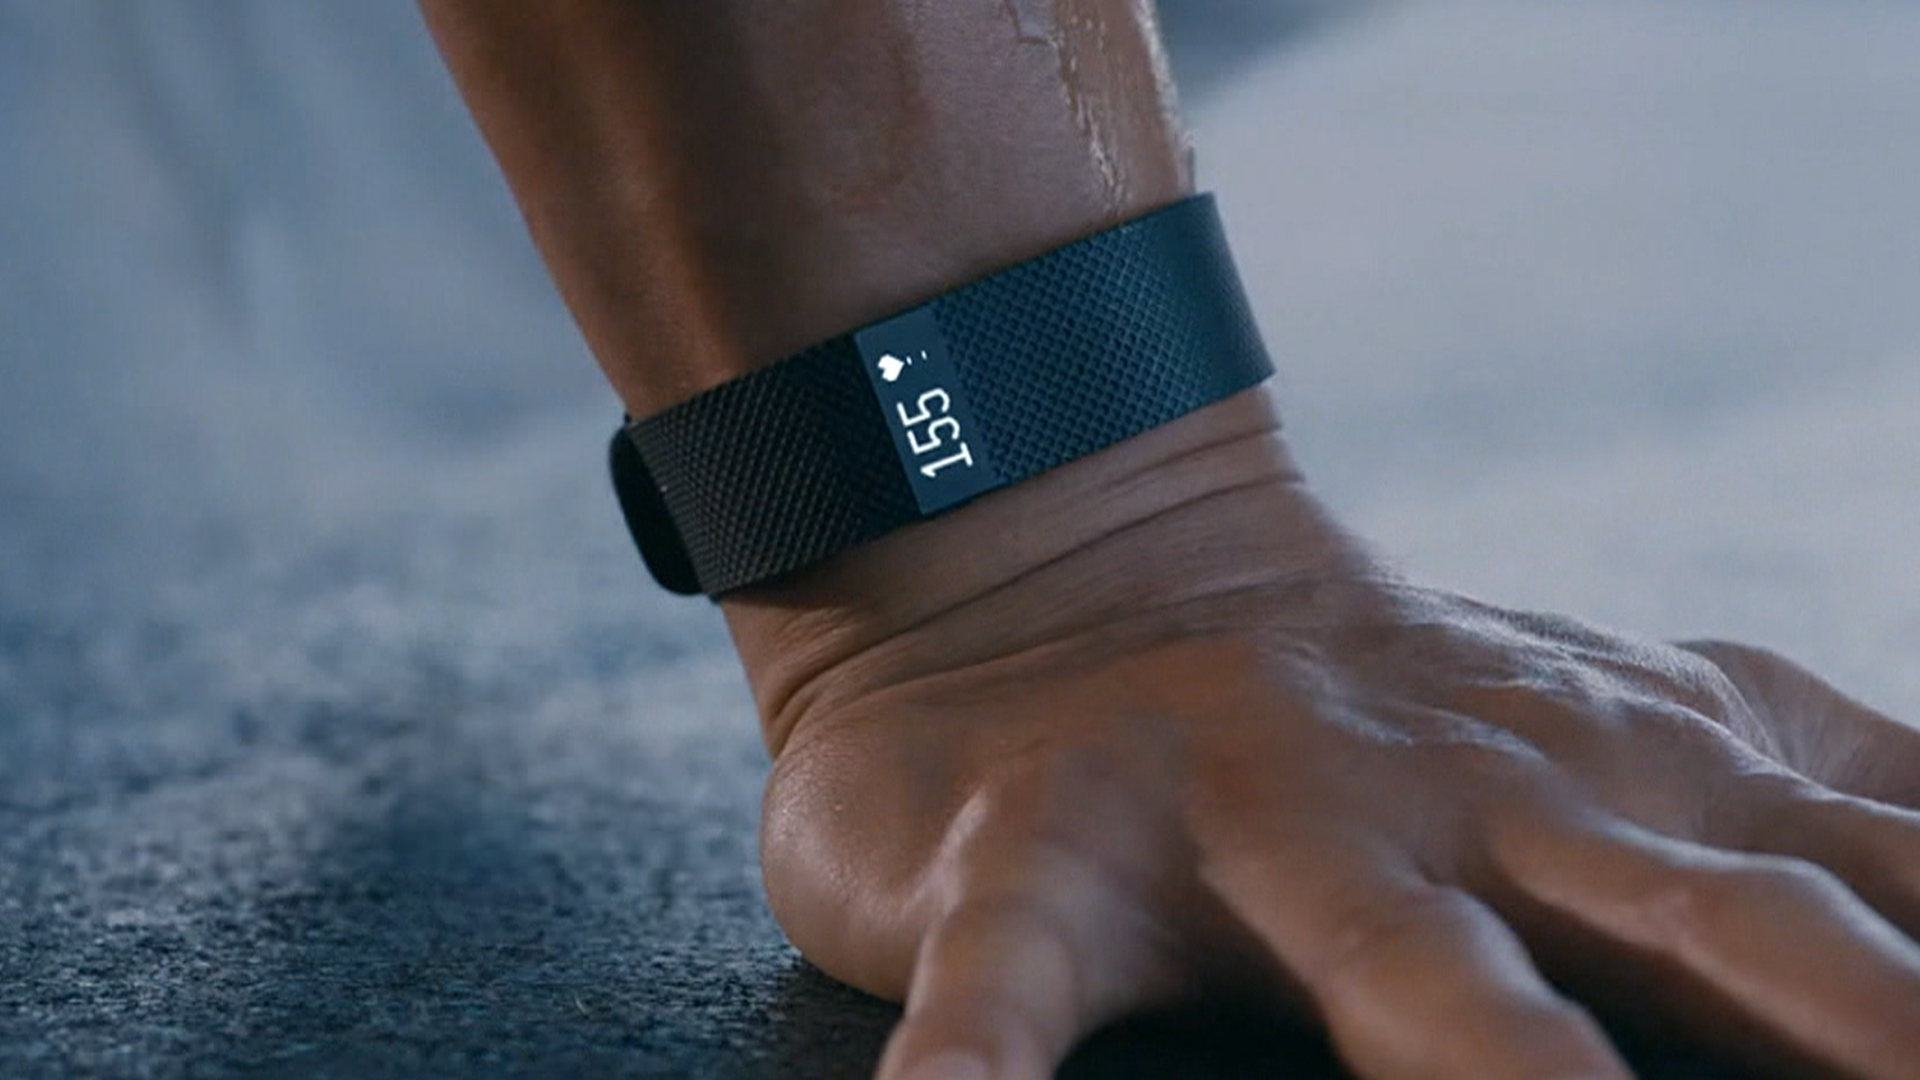 fitbit that tracks heart rate